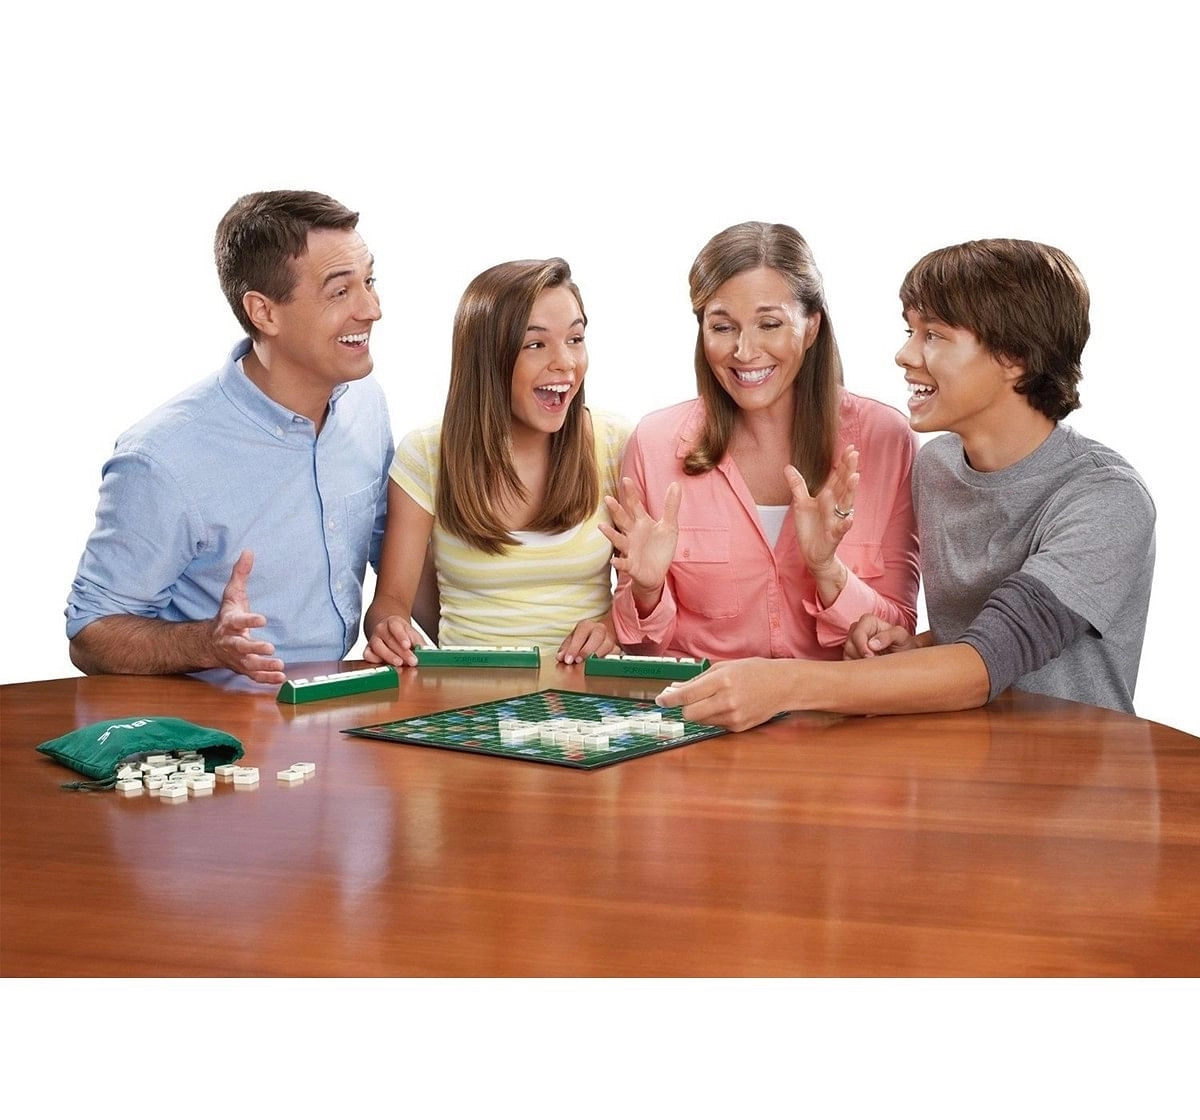 Mattel Scrabble Board Game, Strategic Gameplay, World's Most Popular Word Game, Age 10Y+